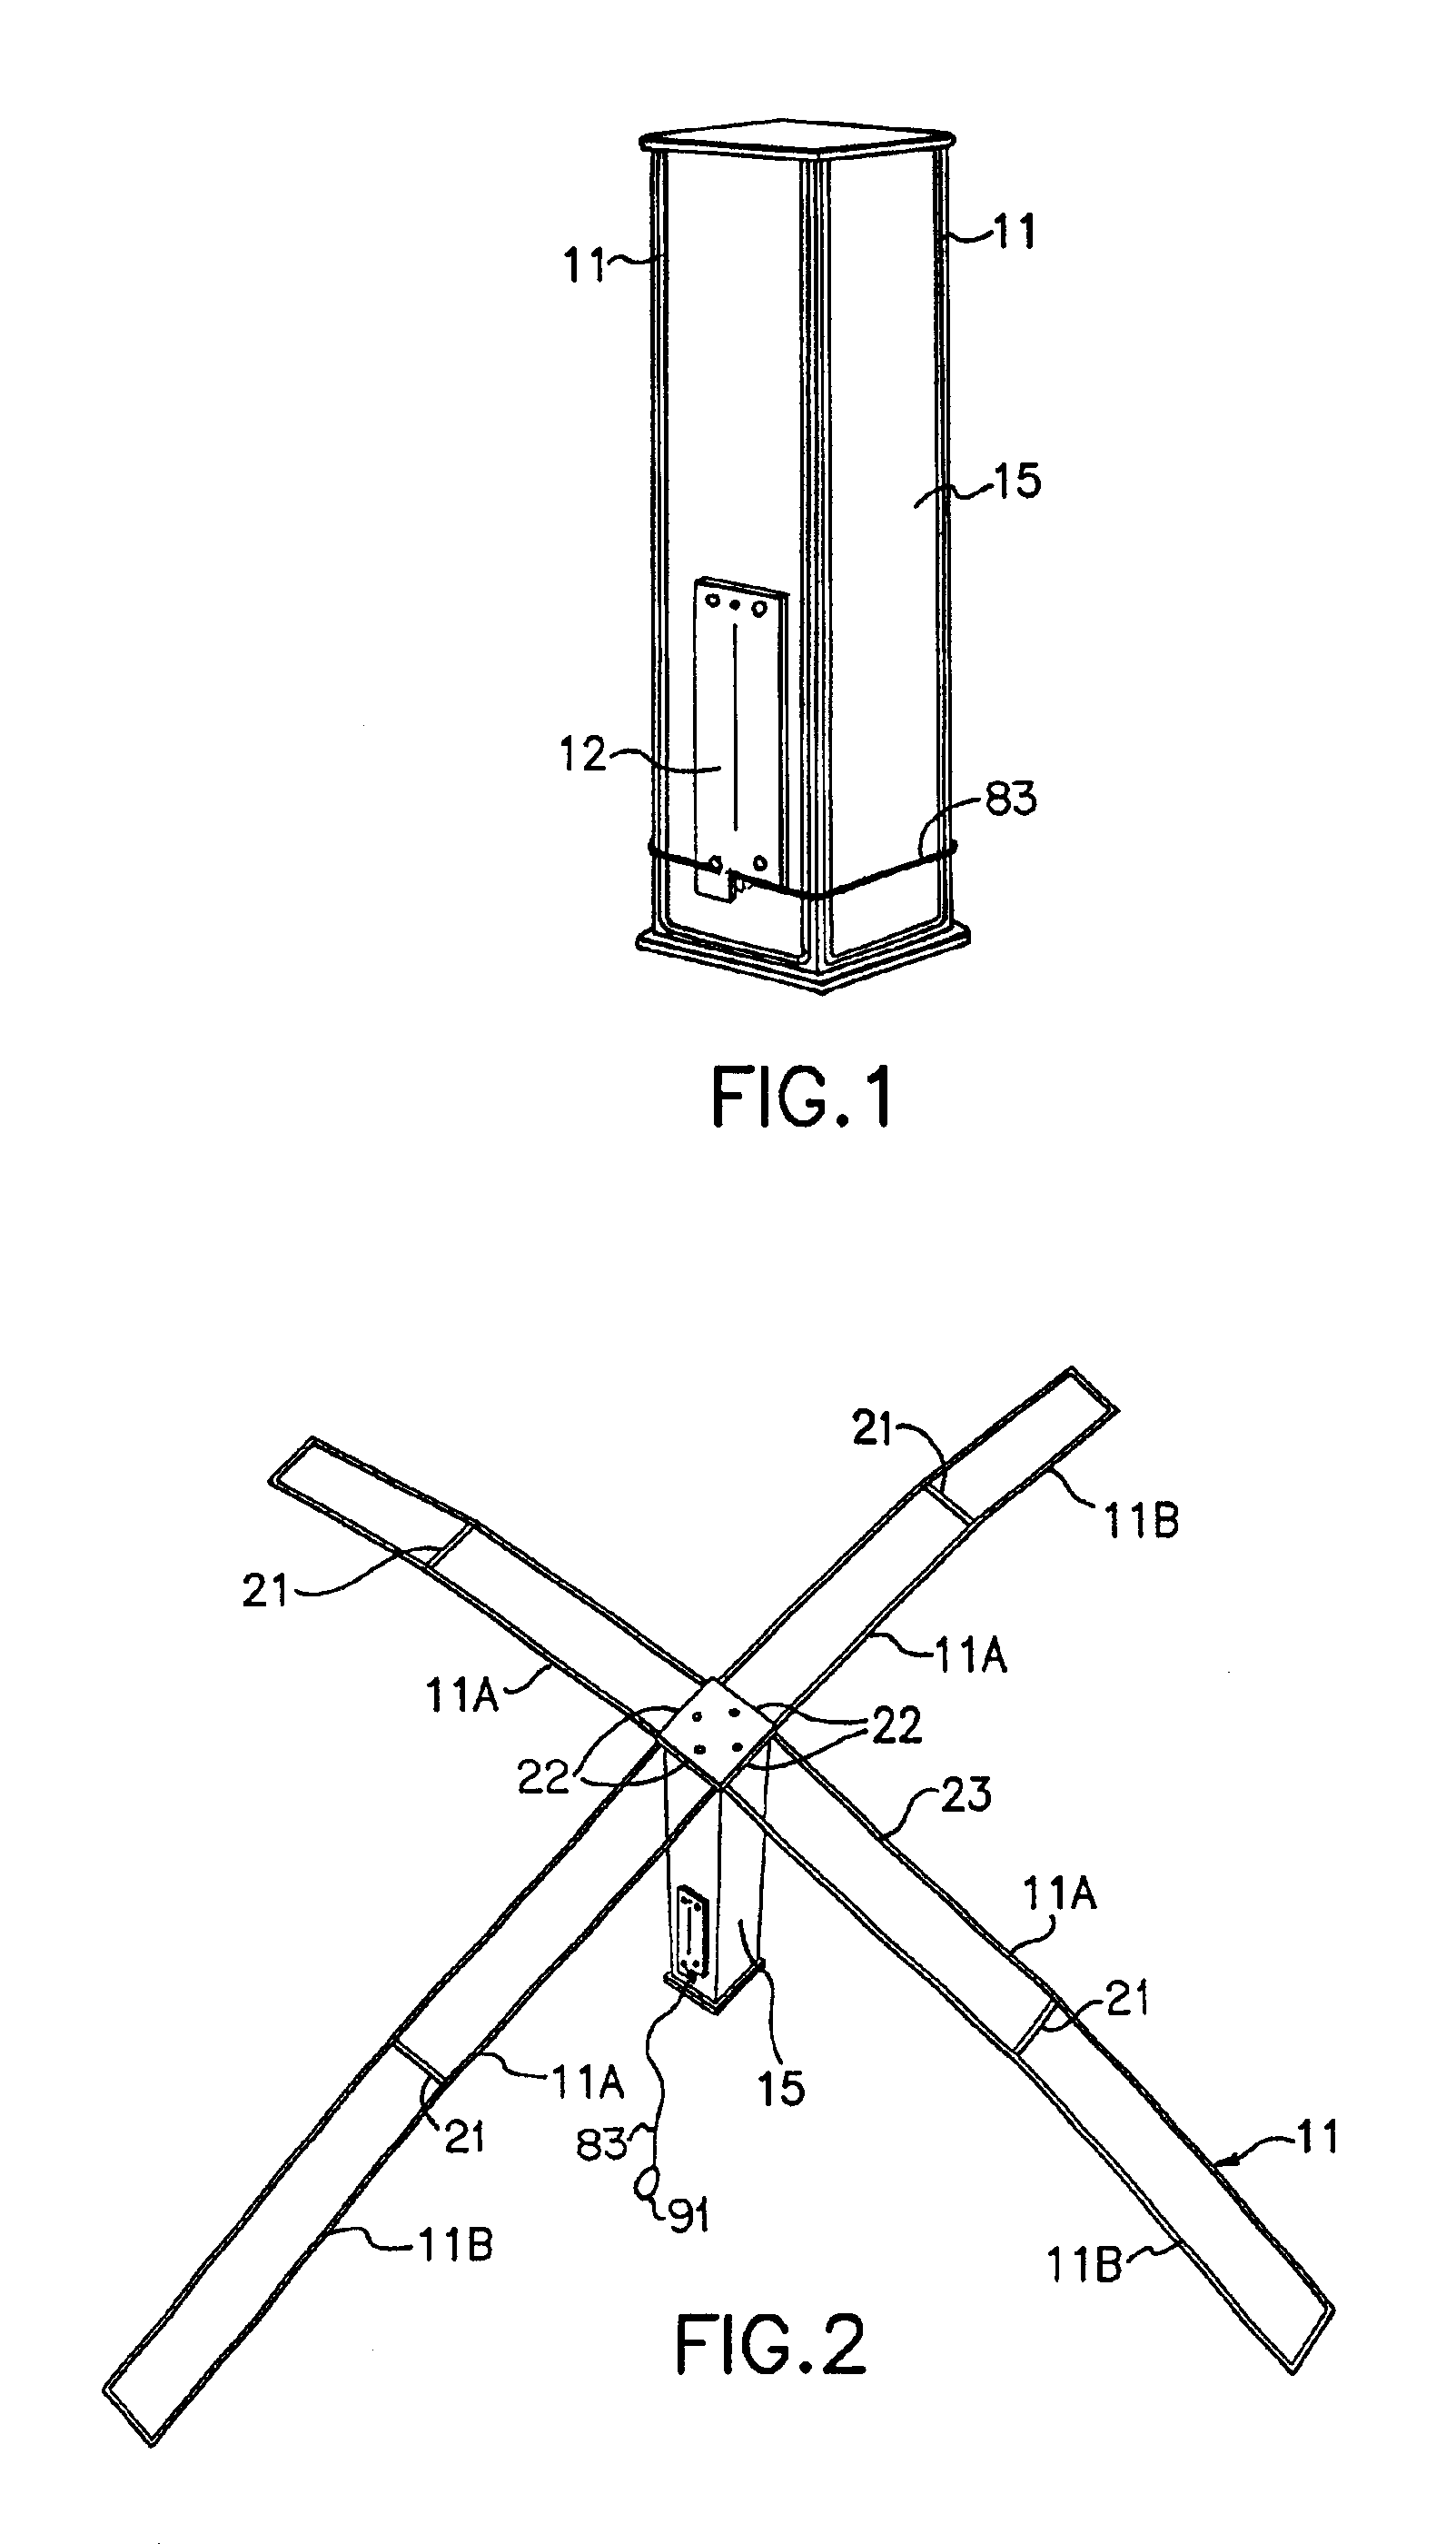 Method and apparatus for storage and deployment of folded panel structures